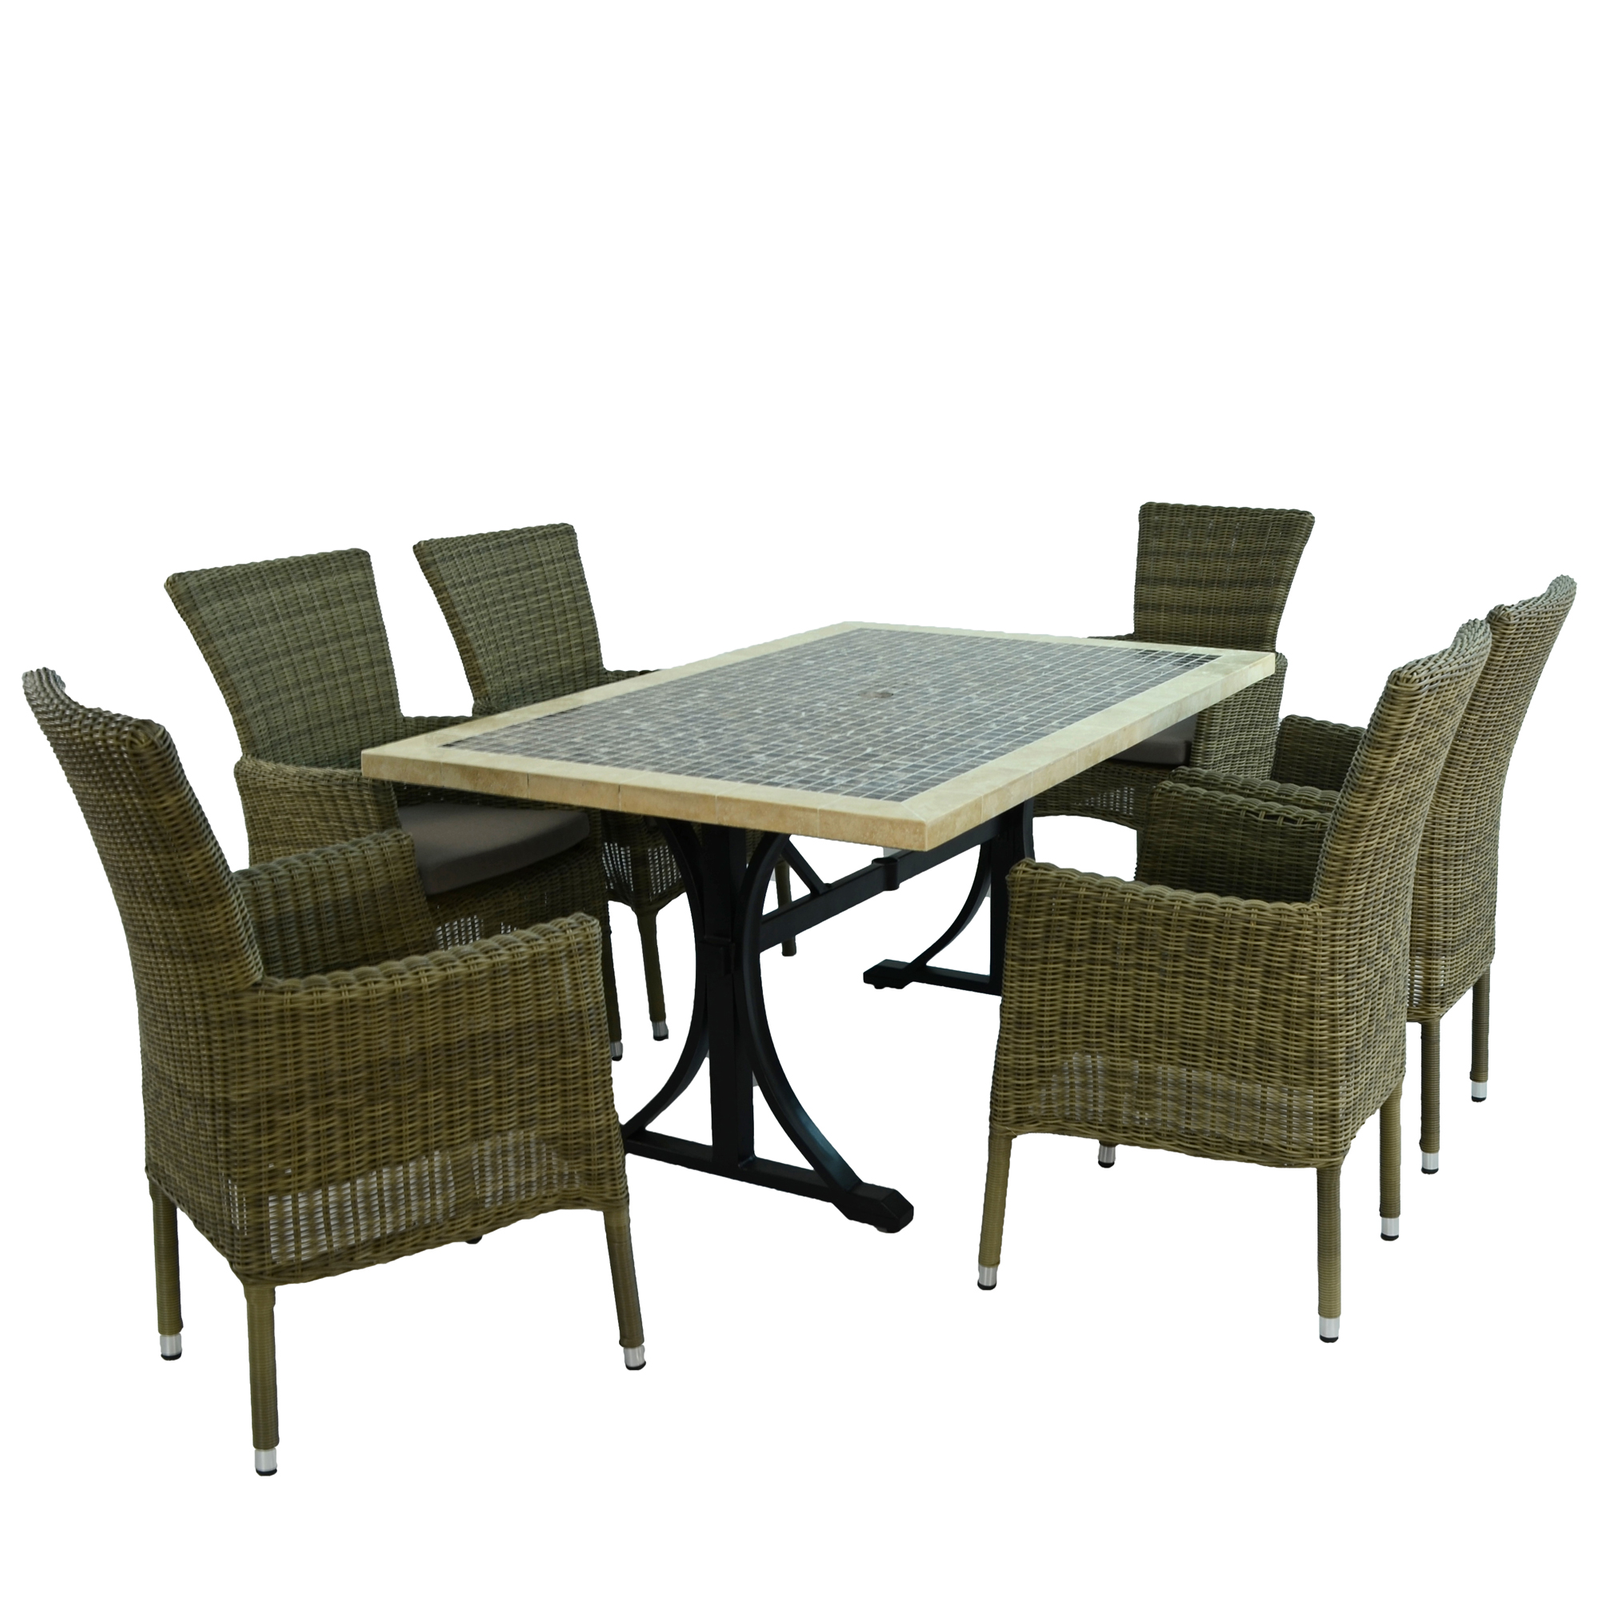 Byron Manor Wilmington Mosaic Stone Garden Dining Table With 6 Dorchester Wicker Chairs Dining Sets Byron Manor Default Title  